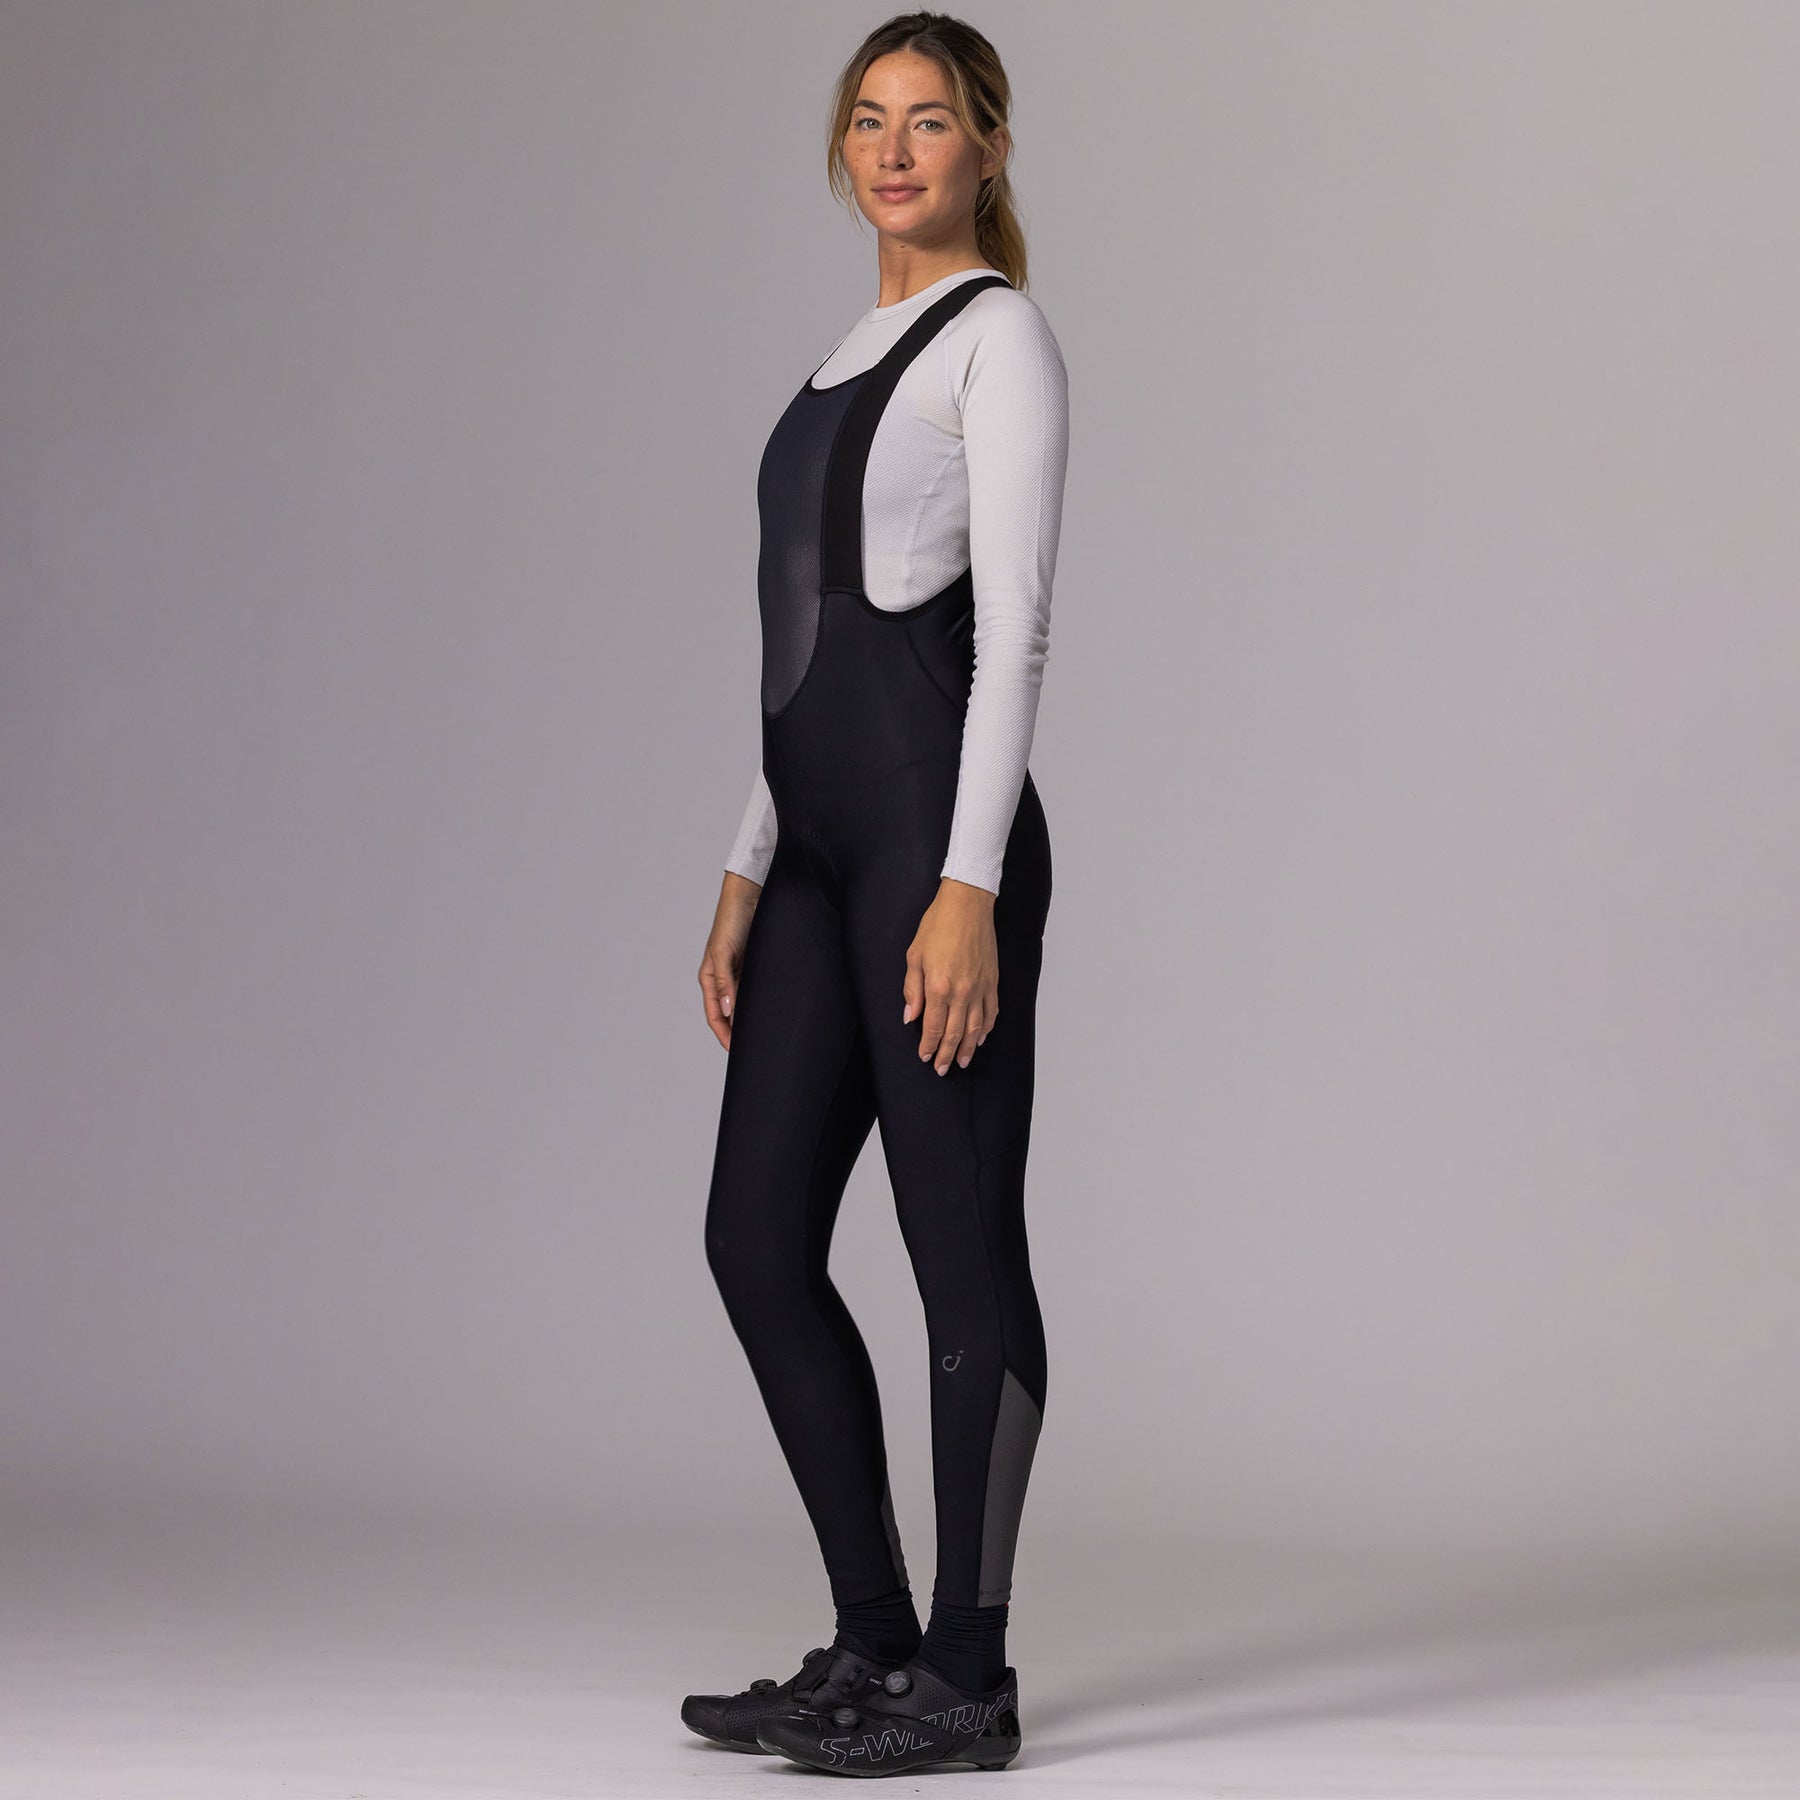 Thermal wear for men and women: 12 important questions and answers